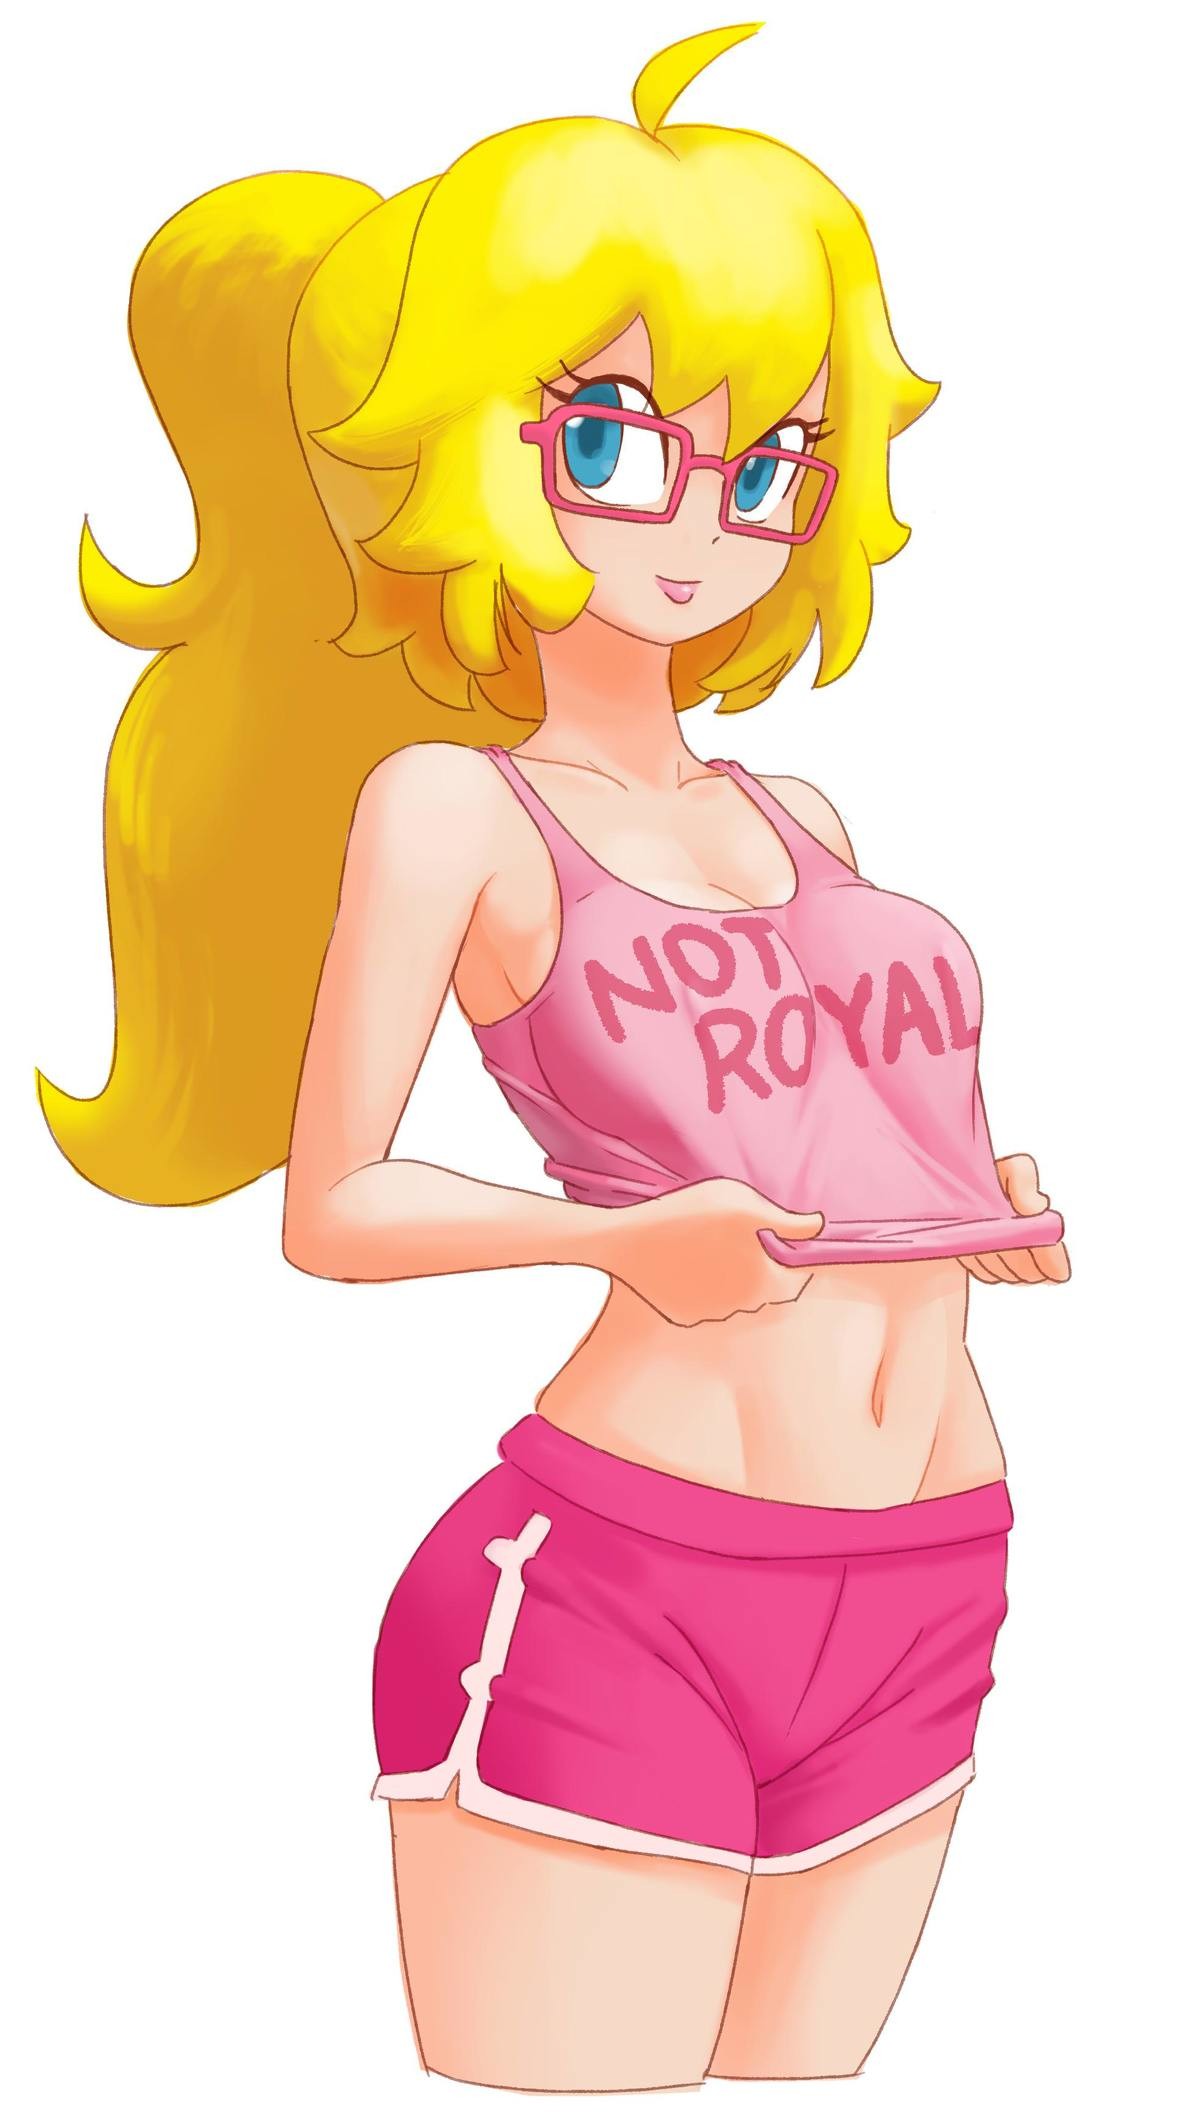 Not Royal by Minus8. 